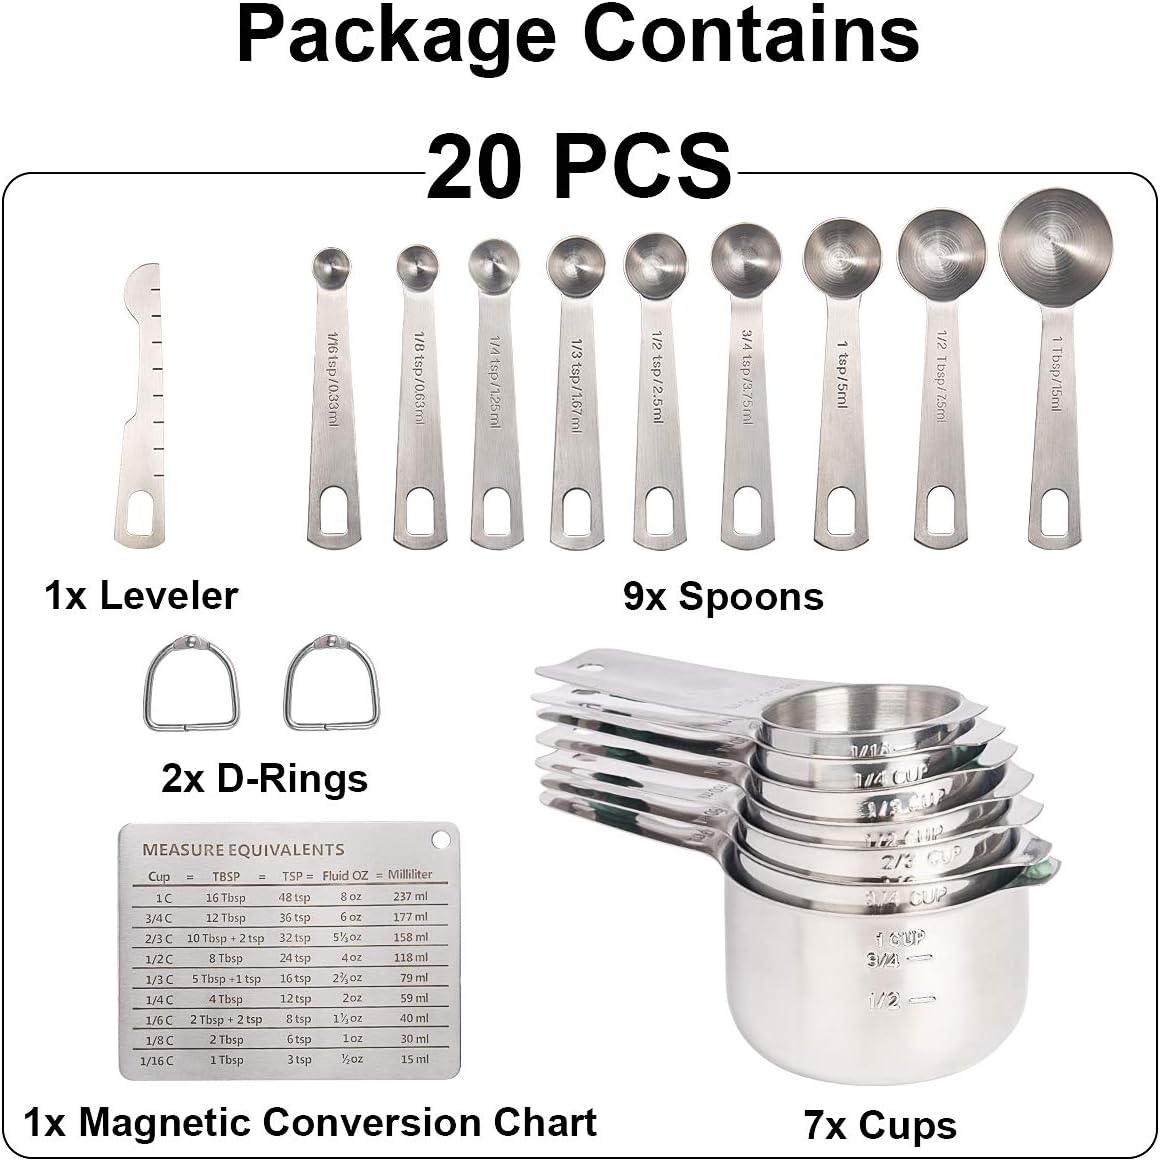 7 Measuring Cups and 7 Measuring Spoons with 2 D-Rings and 1 Professional Magnetic Measurement Conversion Chart U-Taste Measuring Cups and Spoons Set of 15 in 18/8 Stainless Steel Measuring Cups